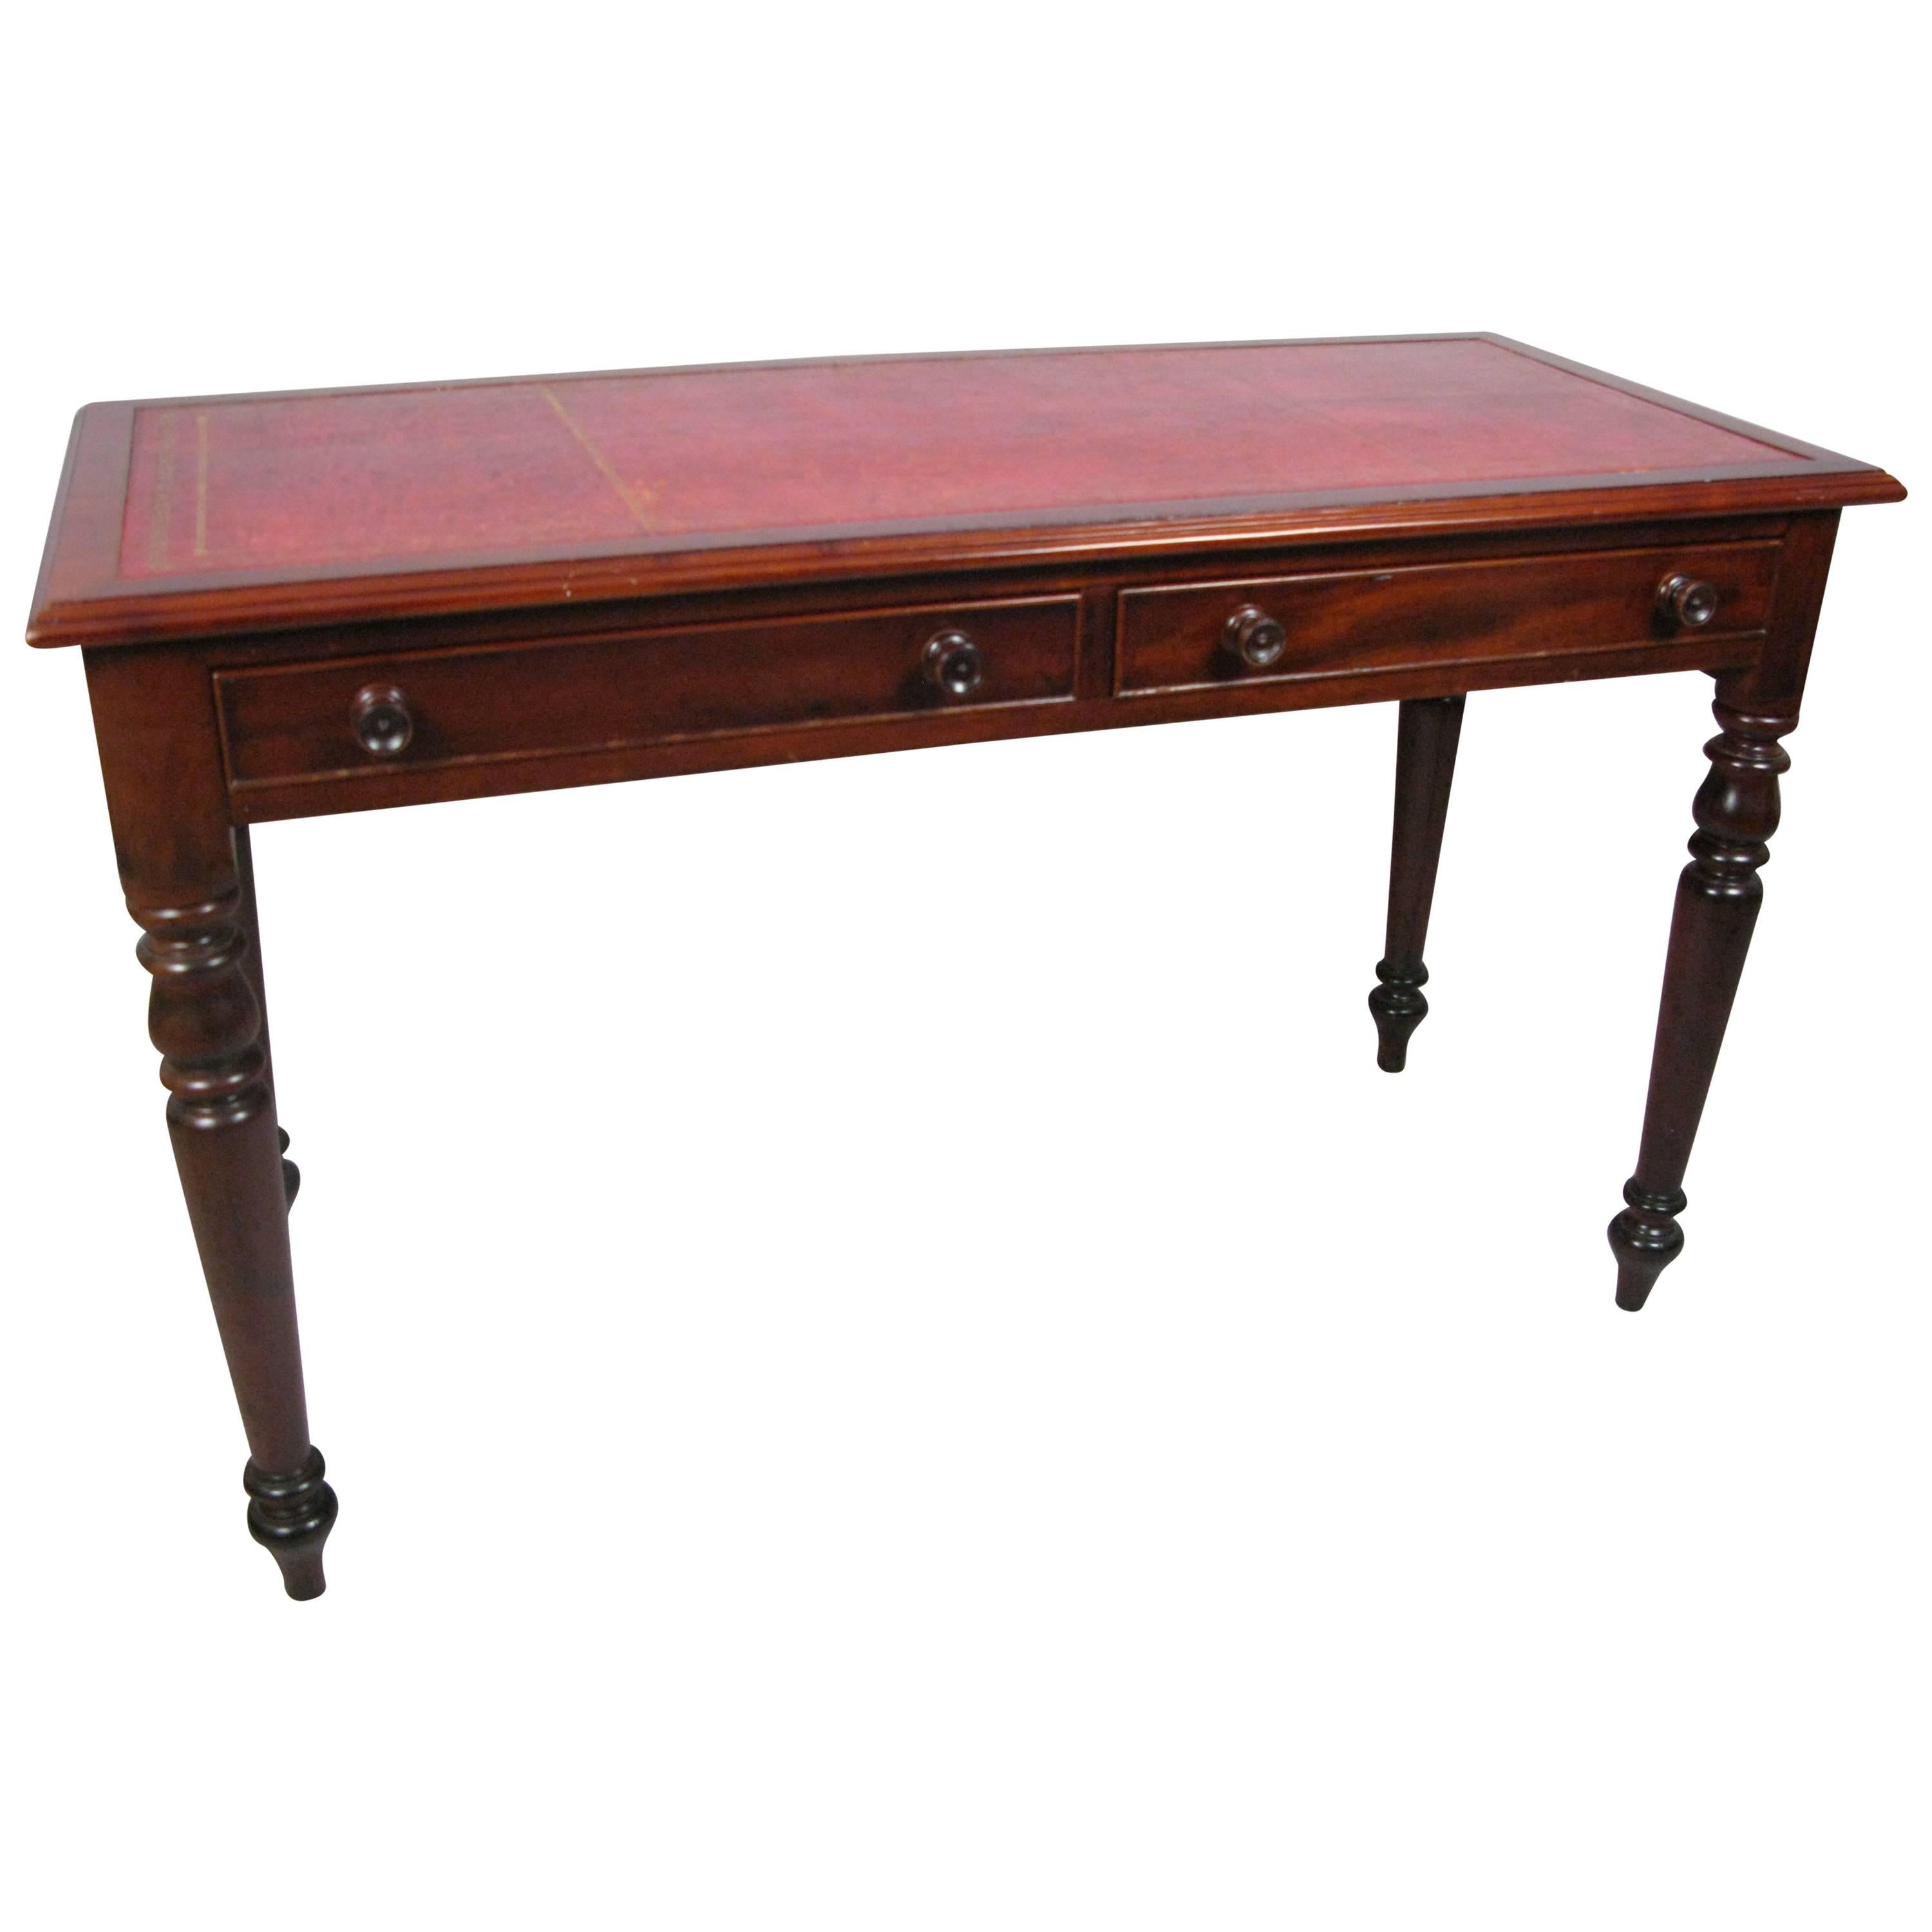 19th Century English Mahogany and Leather Top Writing Desk